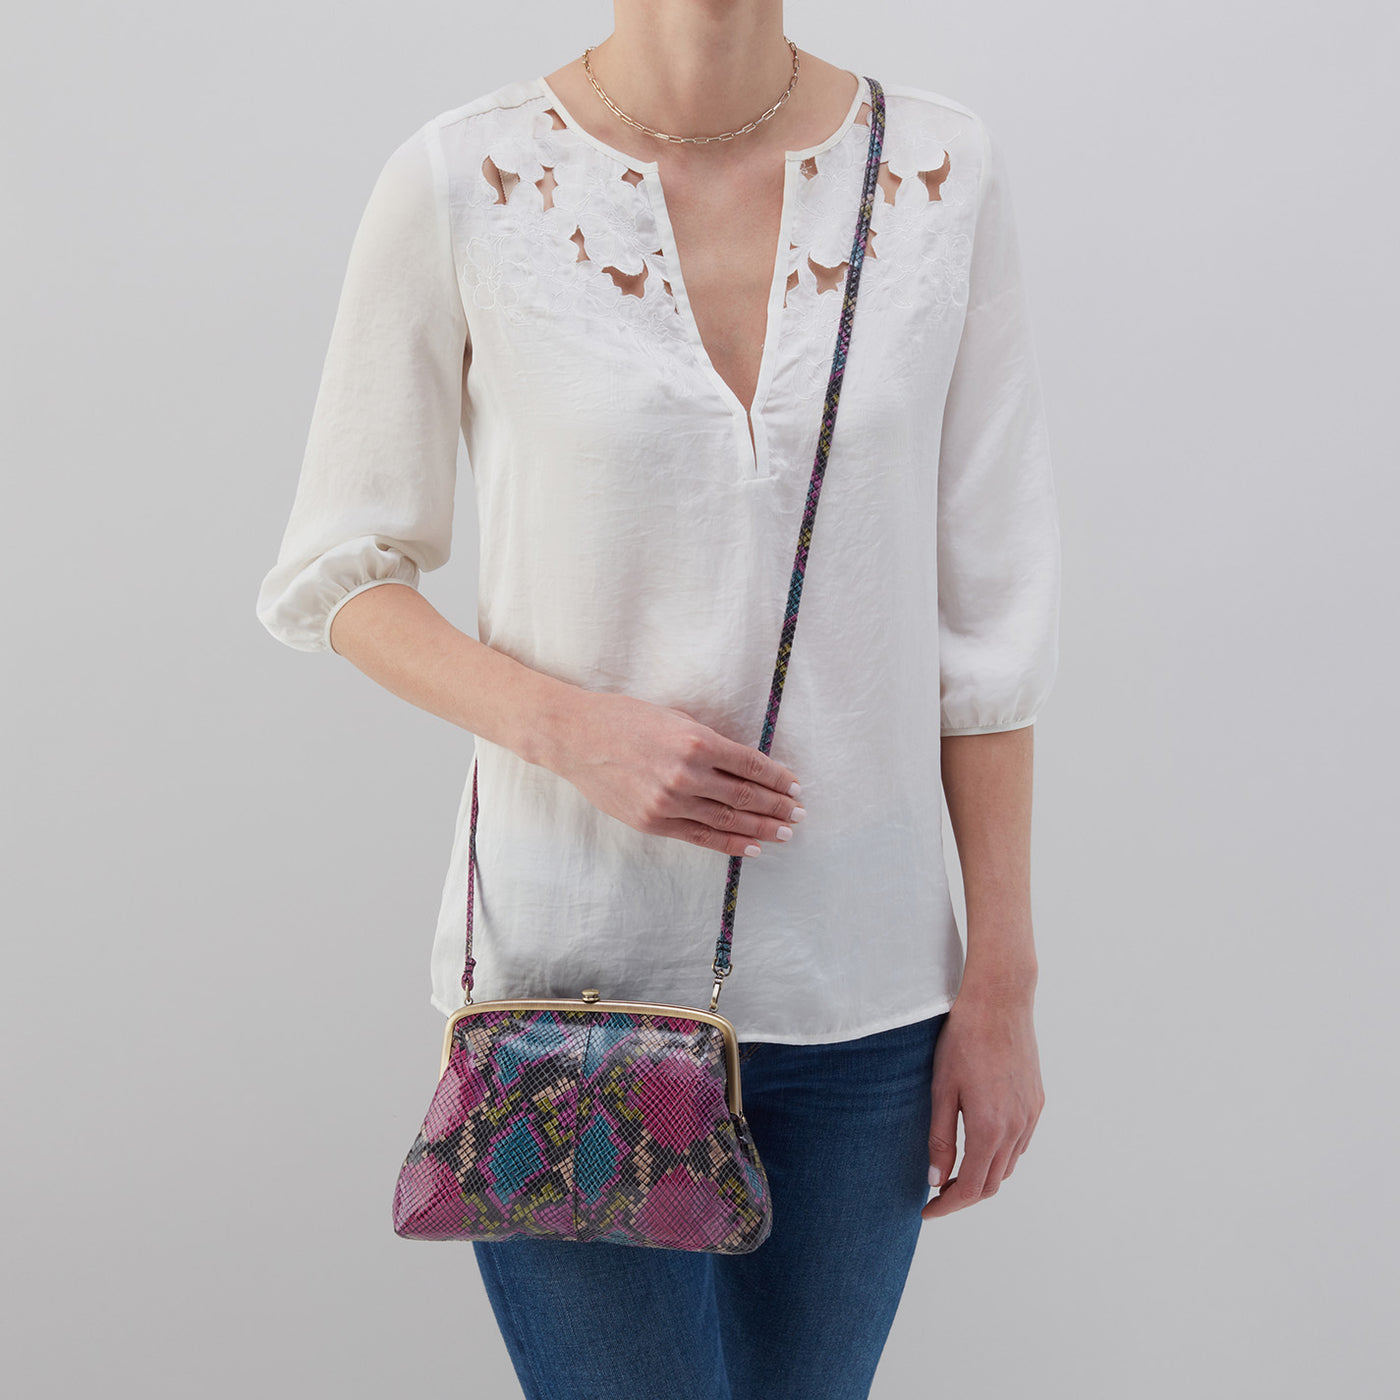 Lana Crossbody In Printed Leather